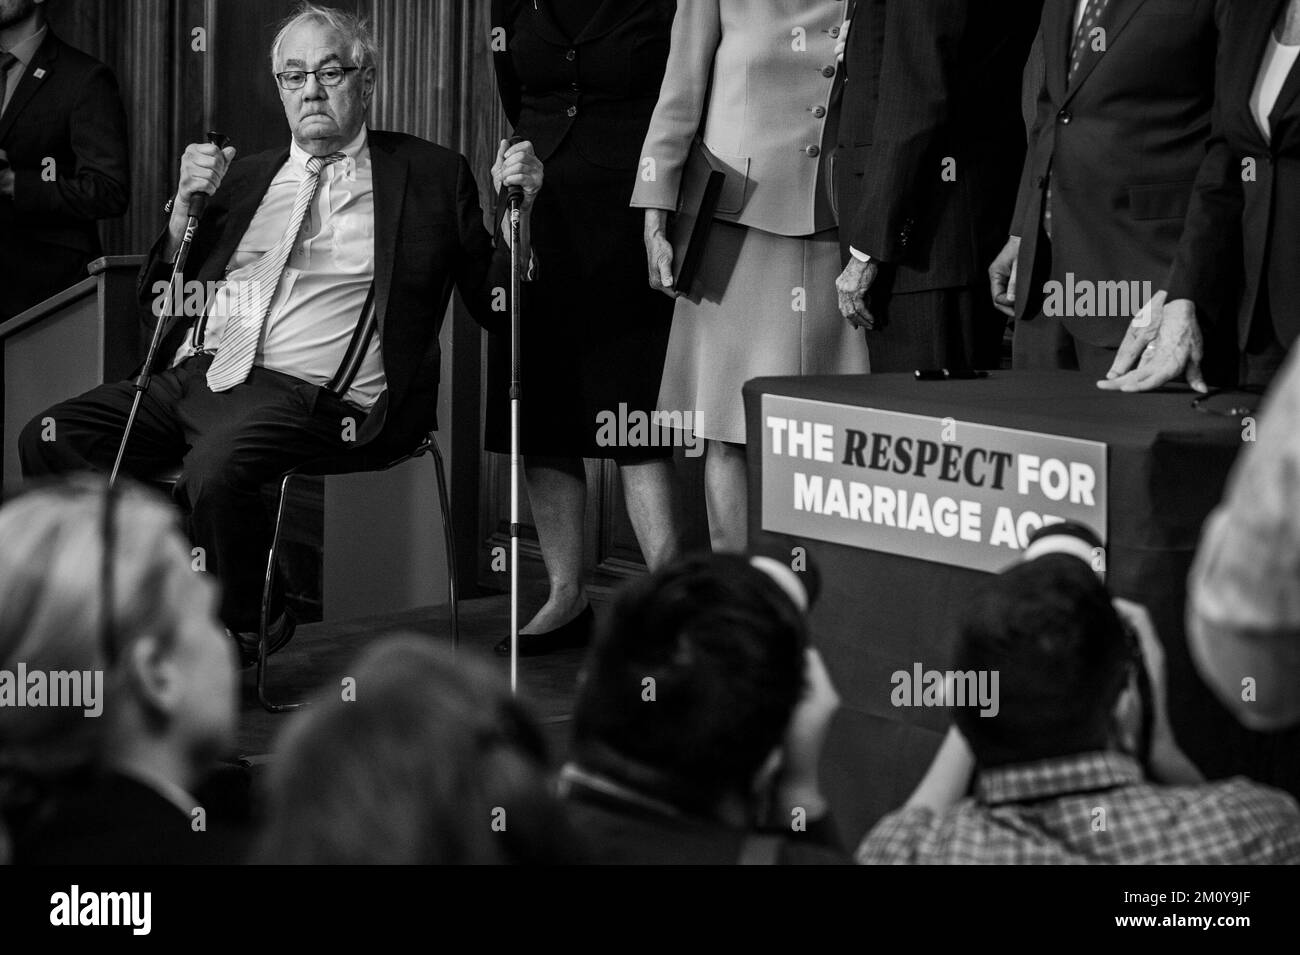 Washington, DC, US December 8, 2022. Former United States Representative Barney Frank (Democrat of Massachusetts) sits to himself son stage while Speaker of the United States House of Representatives Nancy Pelosi (Democrat of California), United States Senate Majority Leader Chuck Schumer (Democrat of New York) and bipartisan Senate and House members pass around the newly signed bill H.R.8404, the âRespect for Marriage Actâ during a bill enrollment ceremony at the US Capitol in Washington, DC, Thursday, December 8, 2022. Out of all the people on stage passing the bill around to touch, Mr. Stock Photo